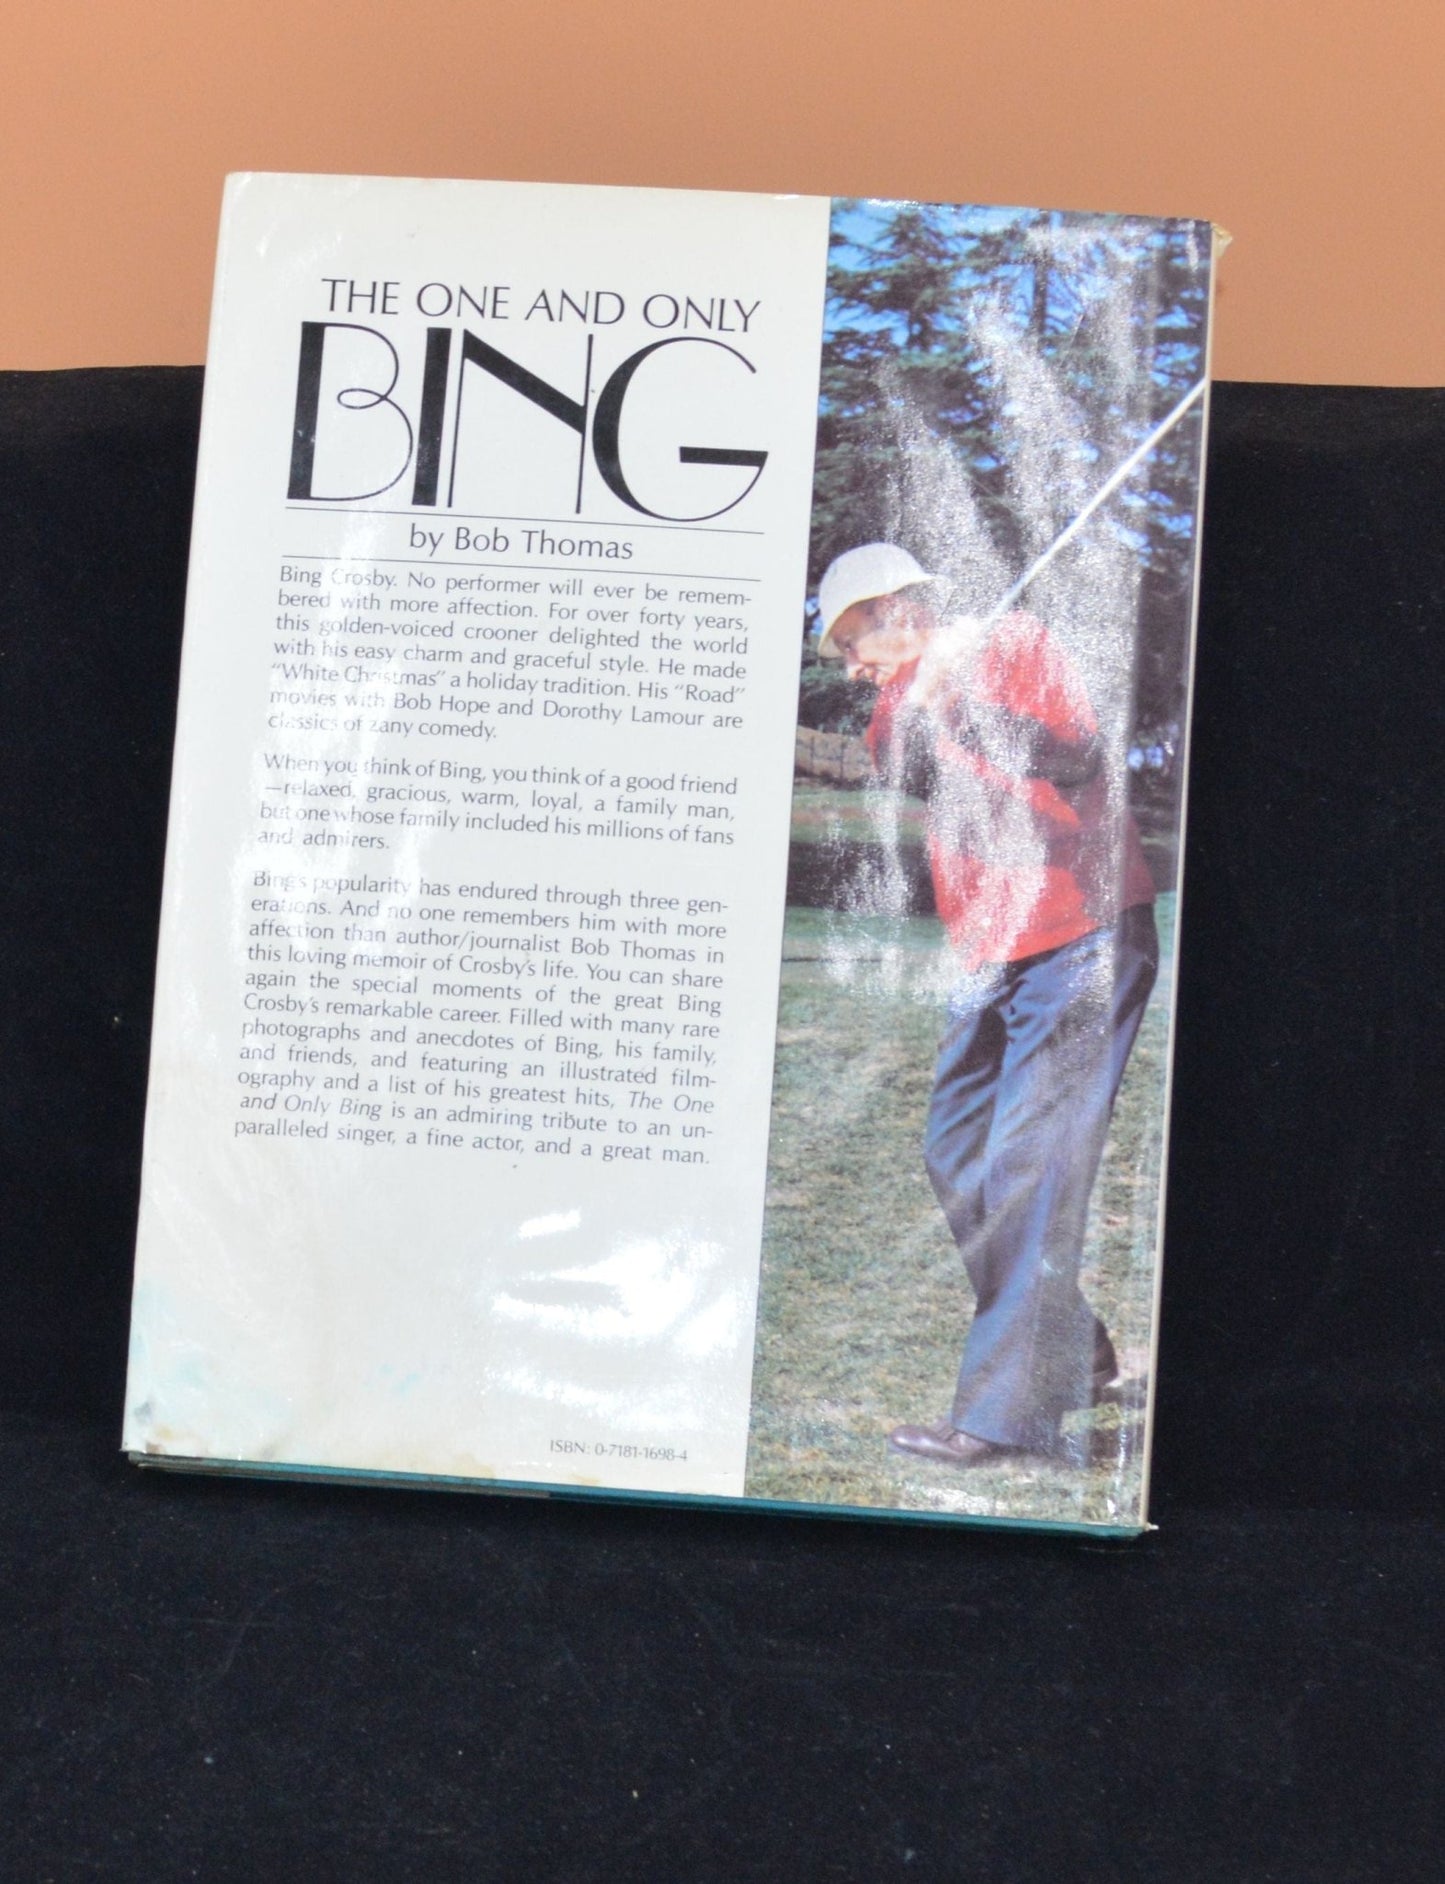 SECONDHAND BOOK ONE AND ONLY BING by BOB THOMAS GOOD CONDITION - TMD167207